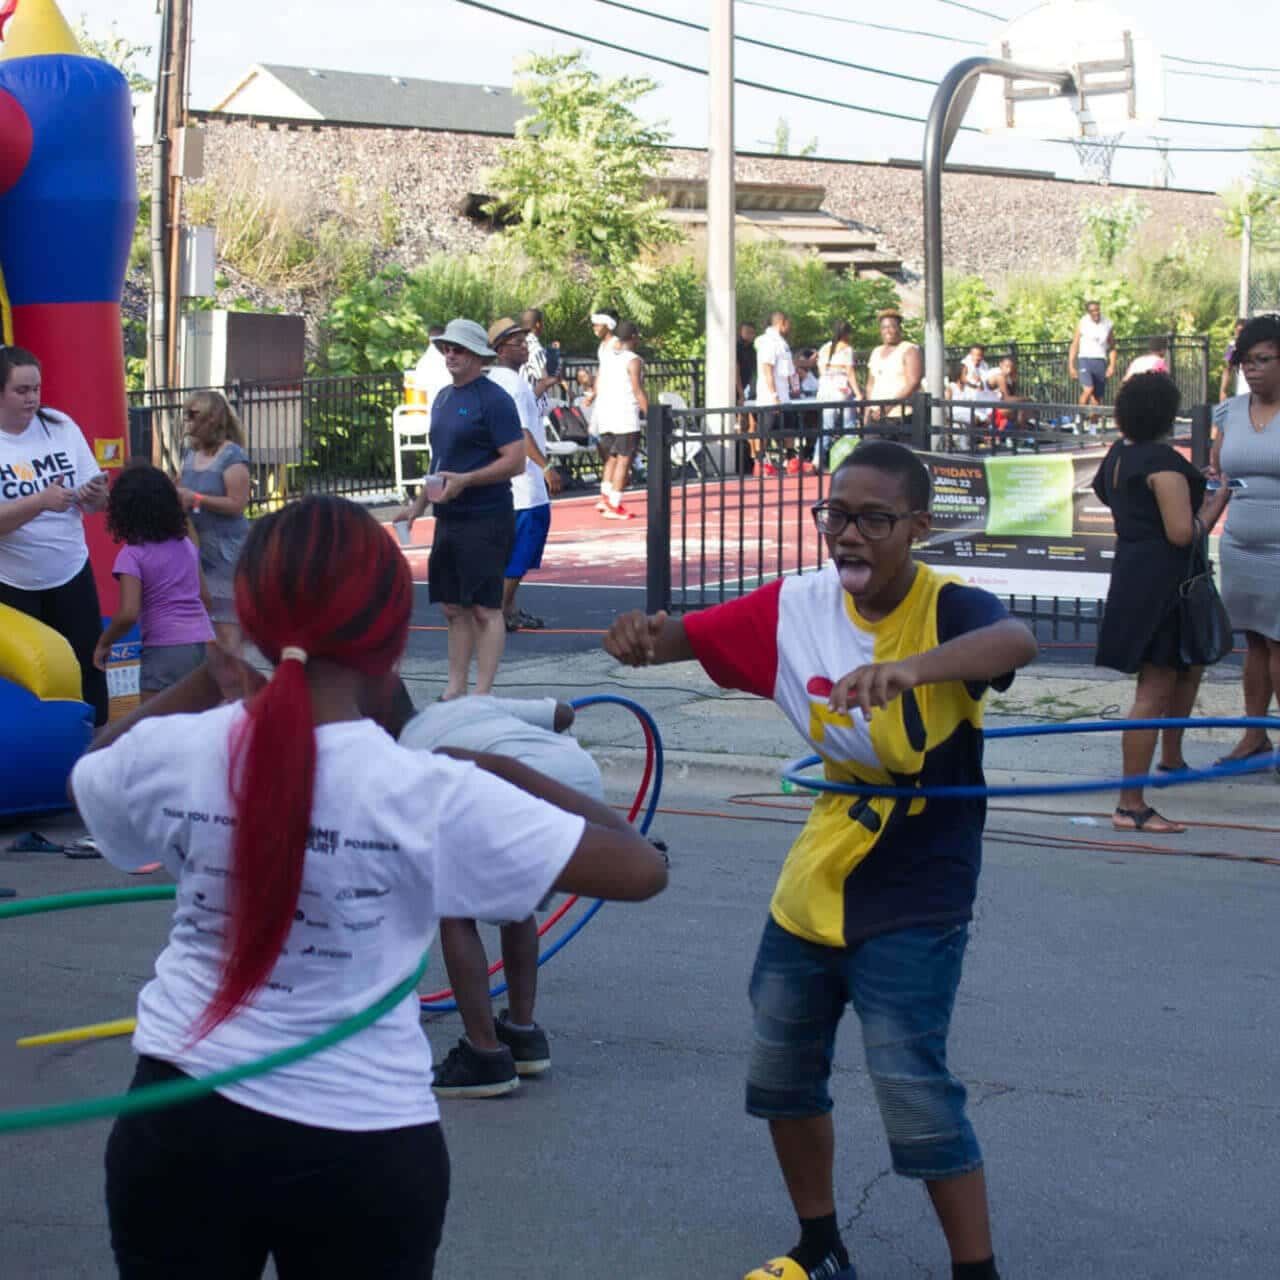 kids hula-hooping at Breakthrough Homecourt event in front of bounce house and basketball court